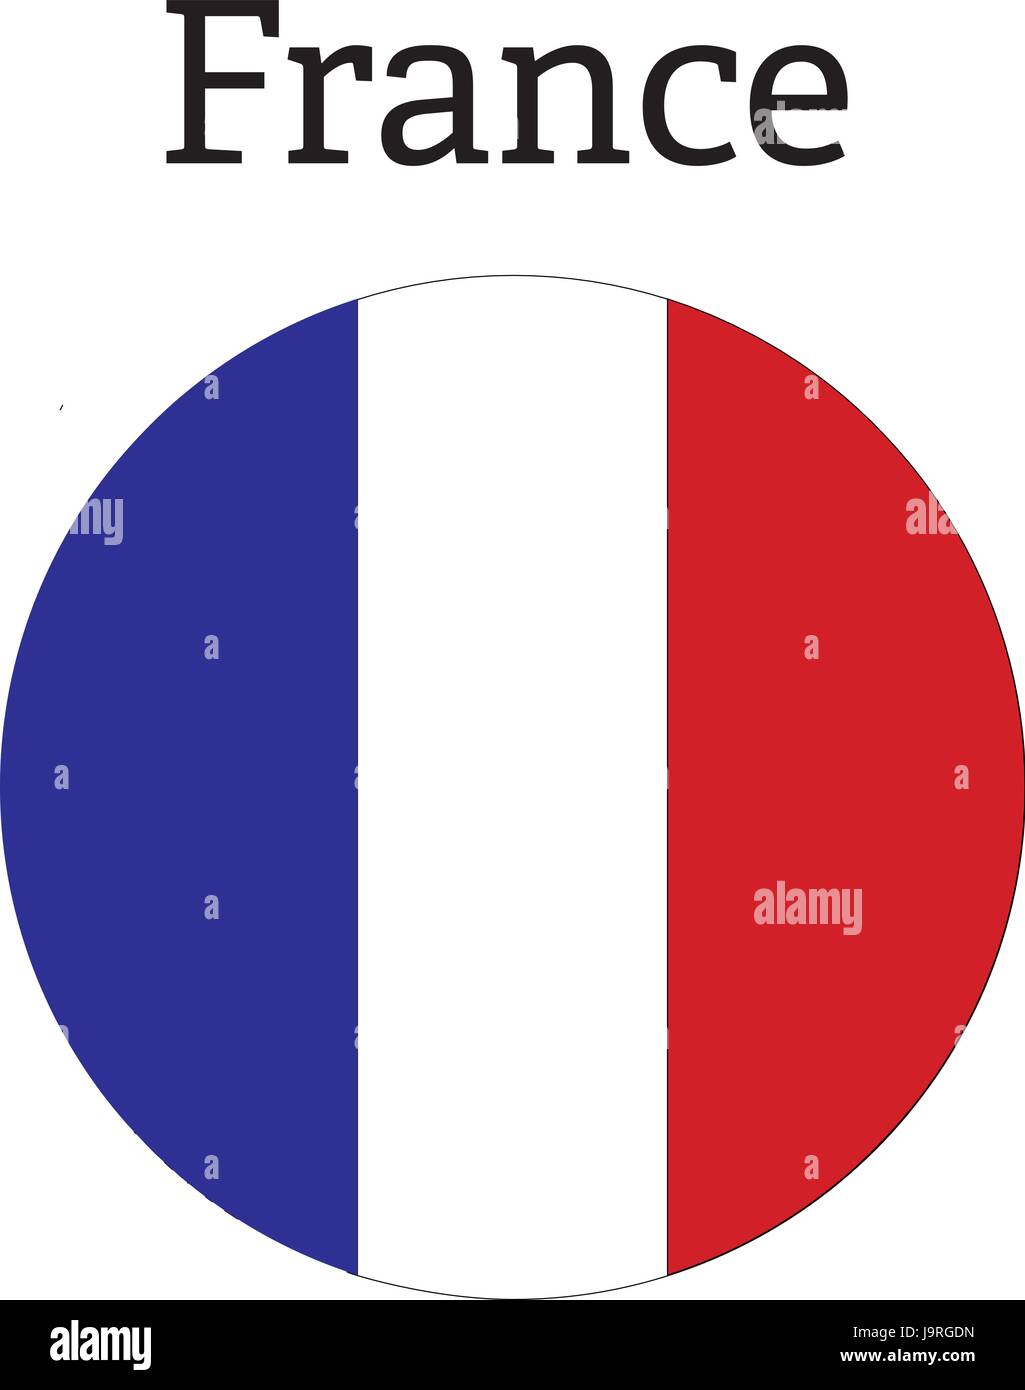 France flag icon round button sign symbol Stock Vector